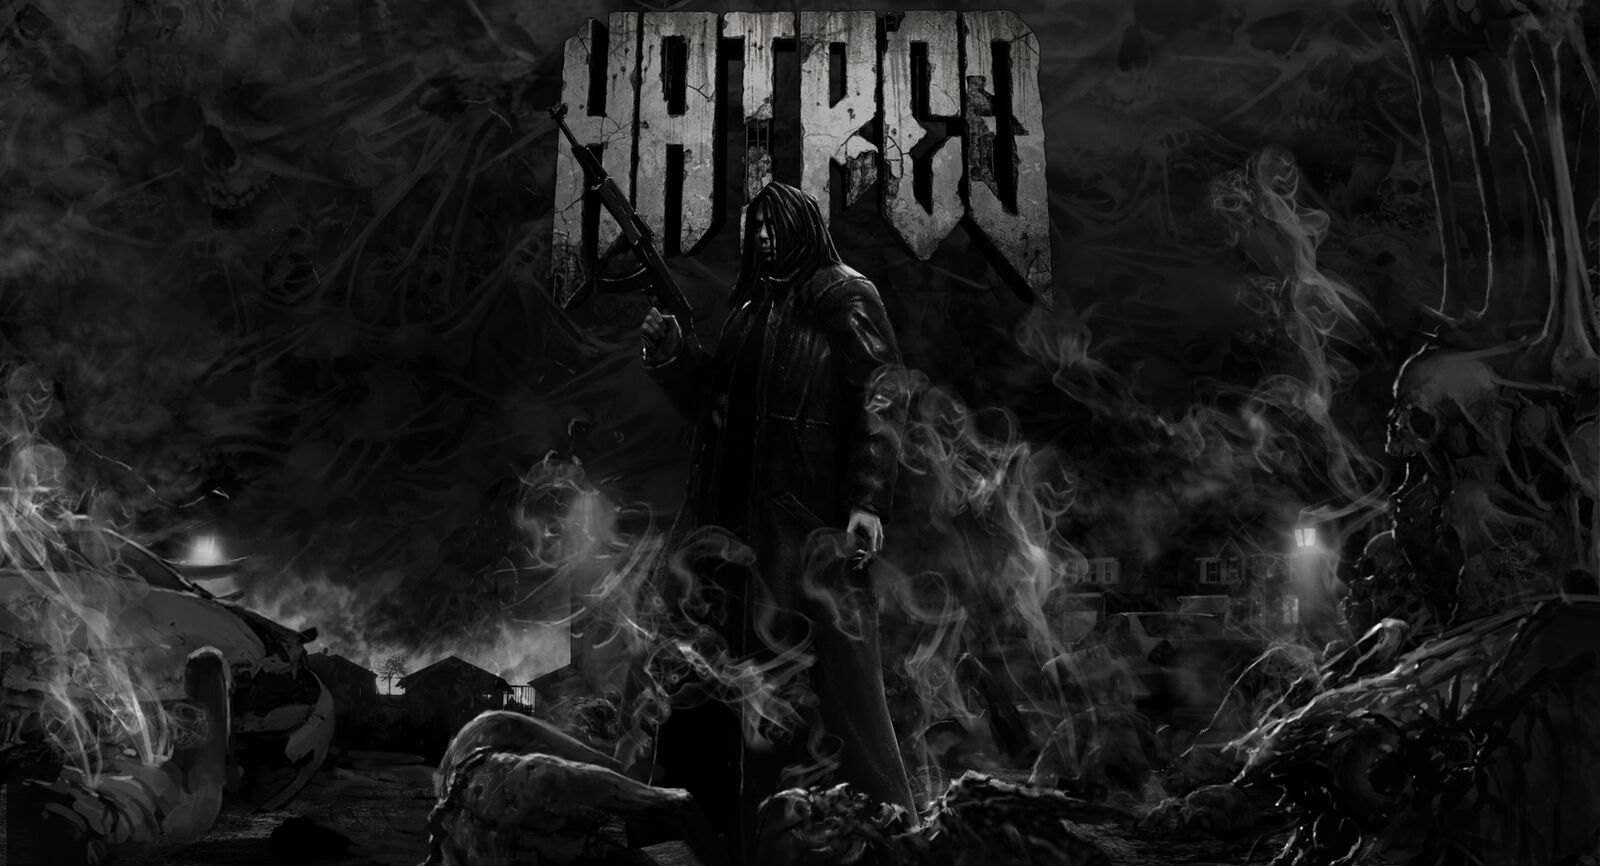 hatred pc game reviews